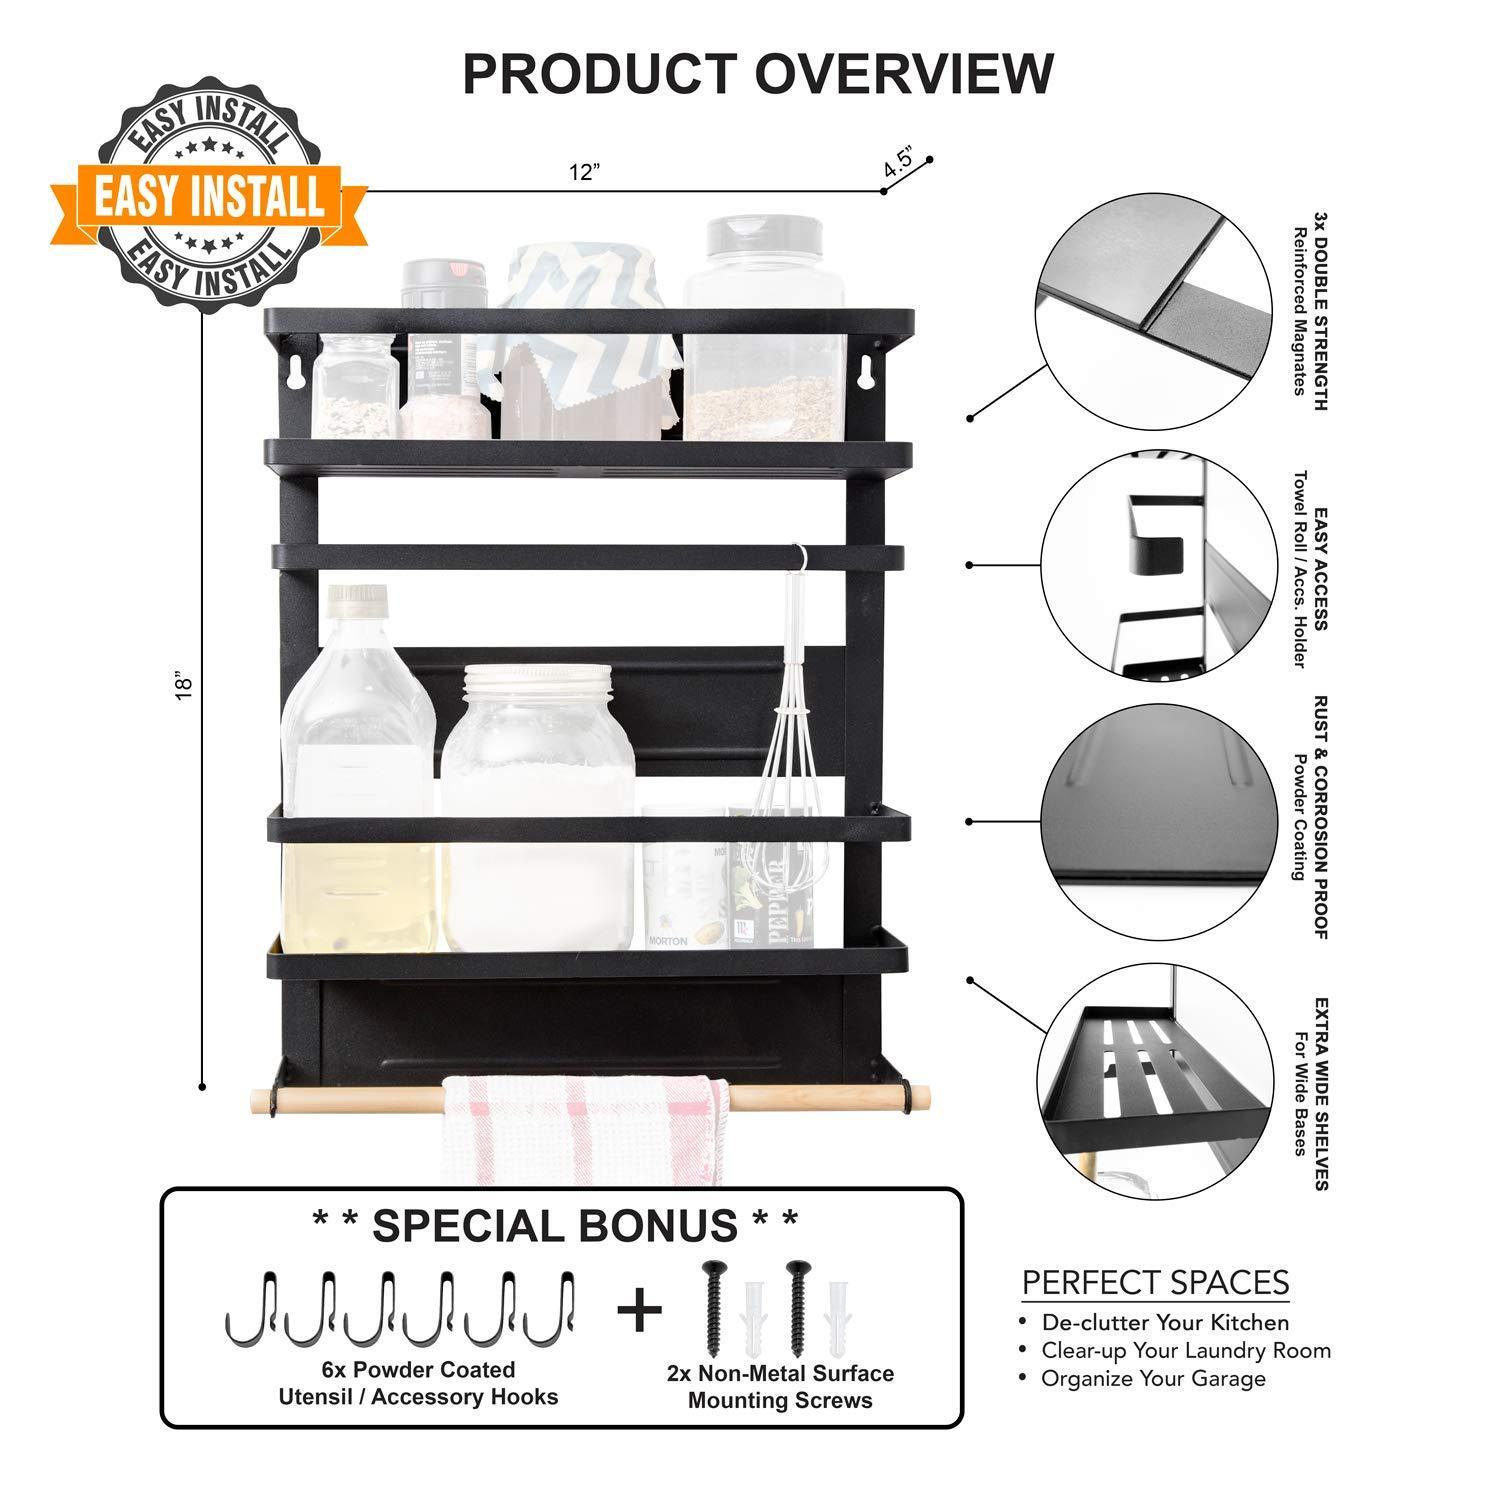 Online shopping magnetic fridge spice rack organizer large with 6 utility hooks 4 tier mounted storage paper towel roll holder multi use kitchen rack shelves pantry wall laundry room garage matte black